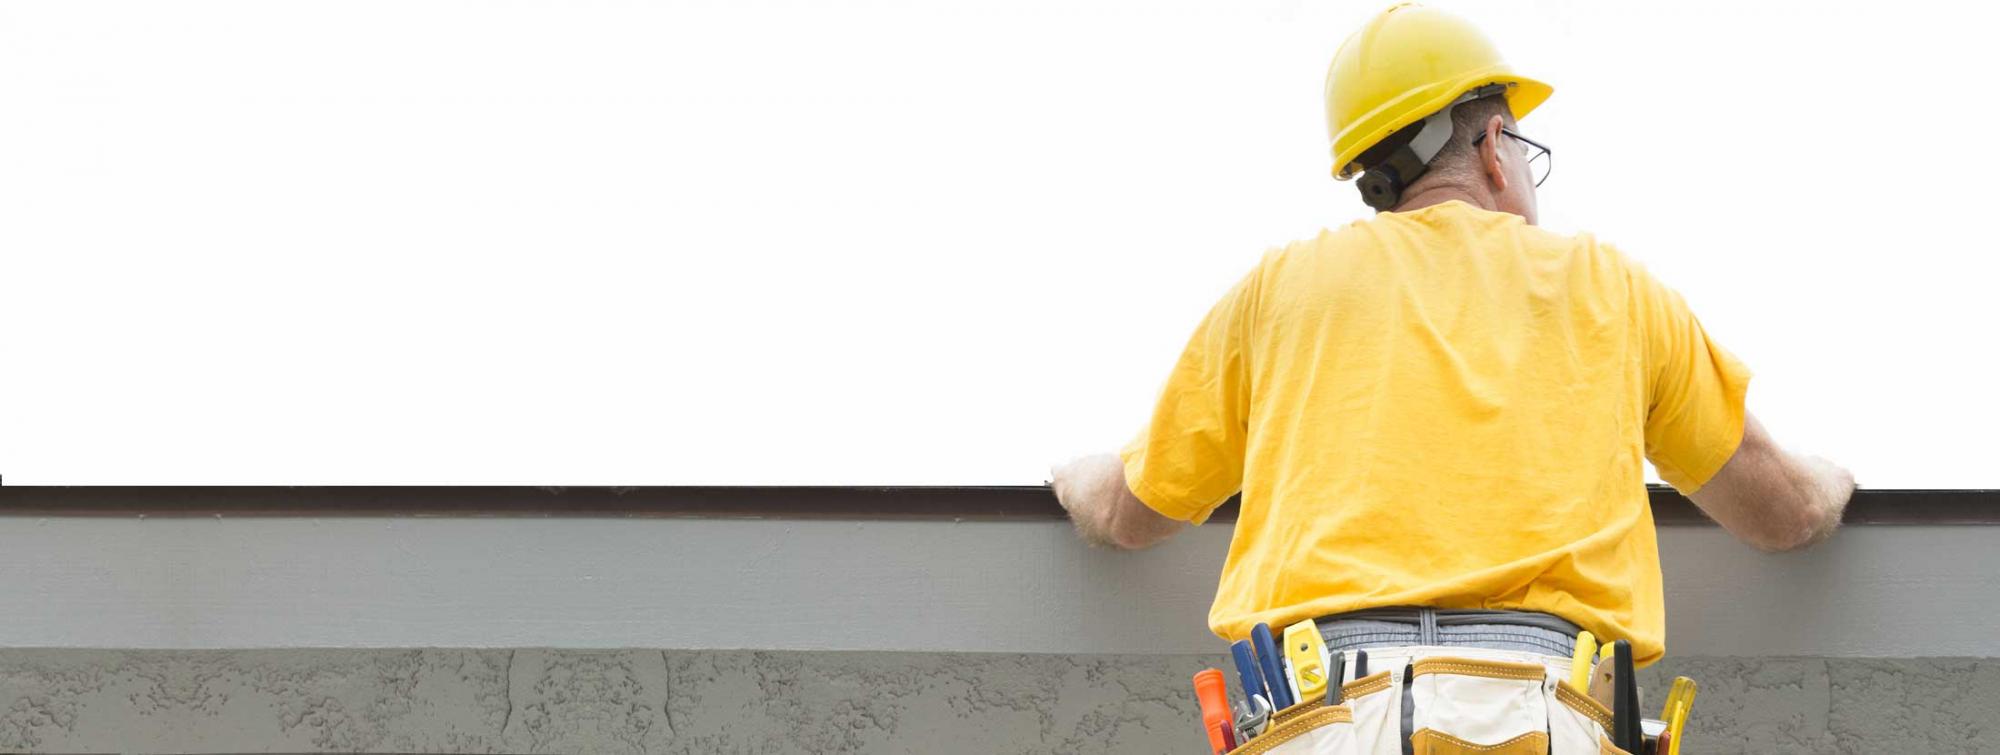 roofer dressed in yellow construction hat and tshirt inspecting a flat roof with tools on his back pocket.